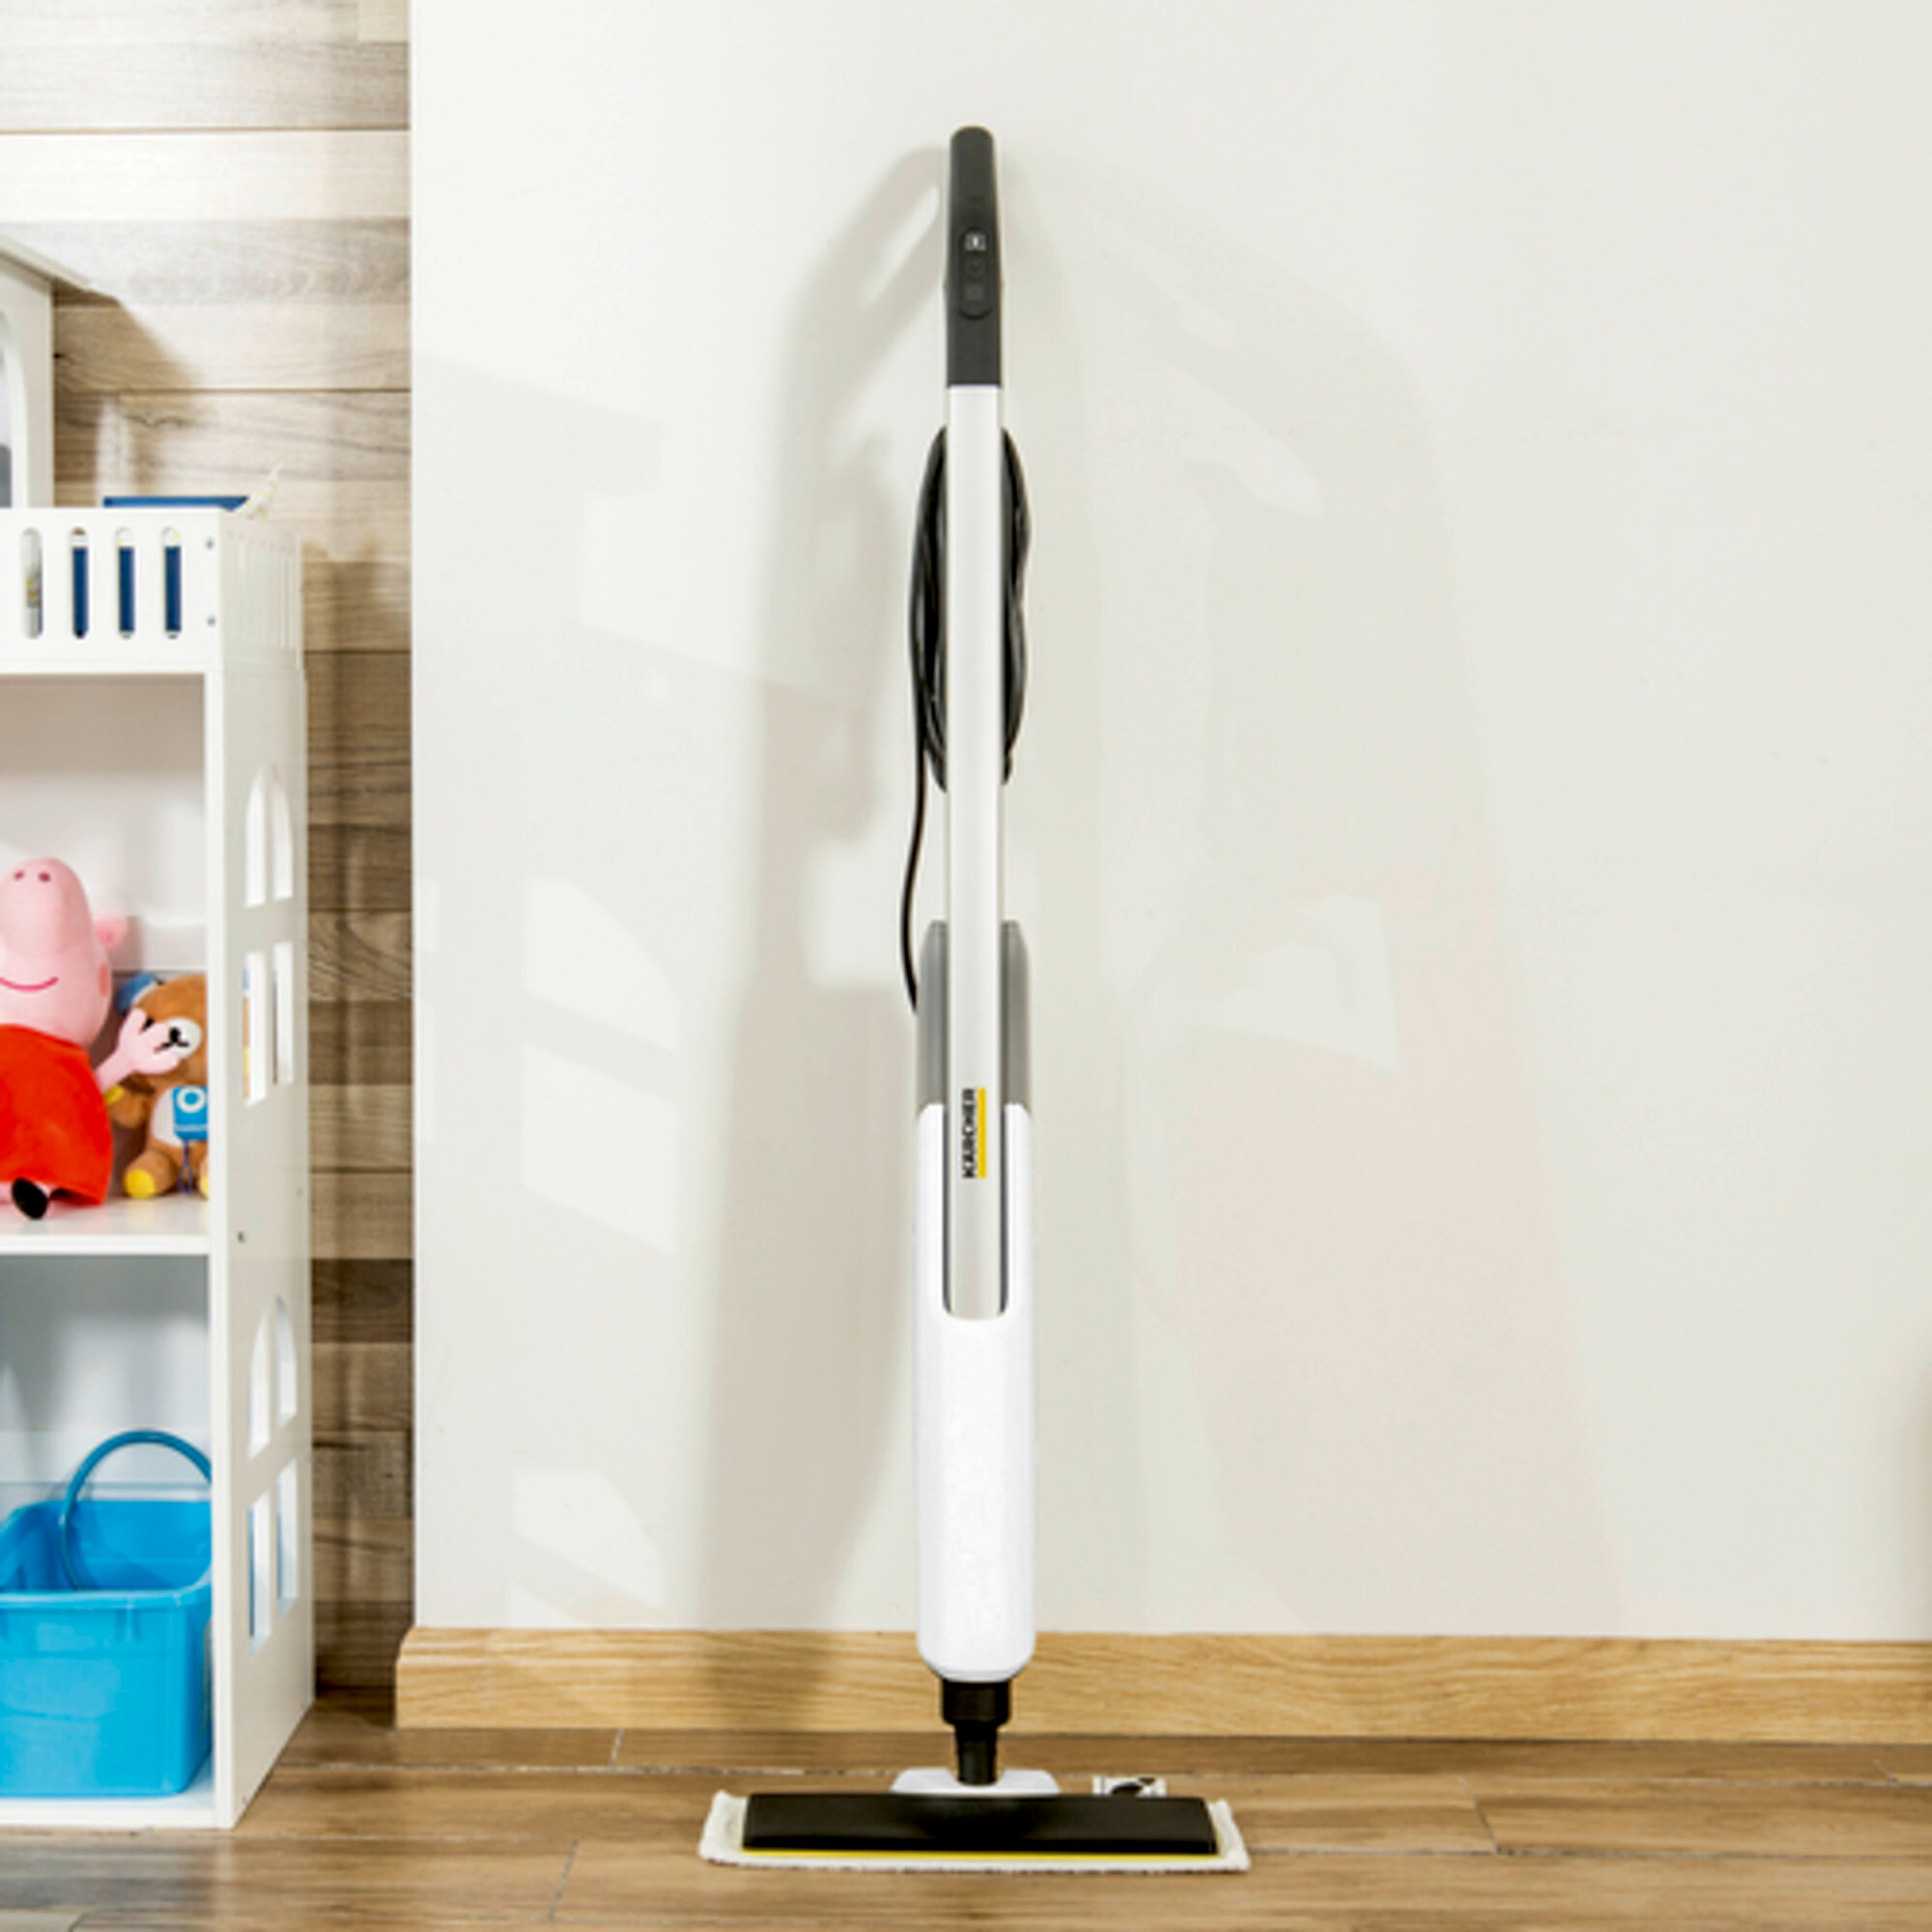 Steam mop SC 2 Upright: Slim line product design with integrated swivel joint